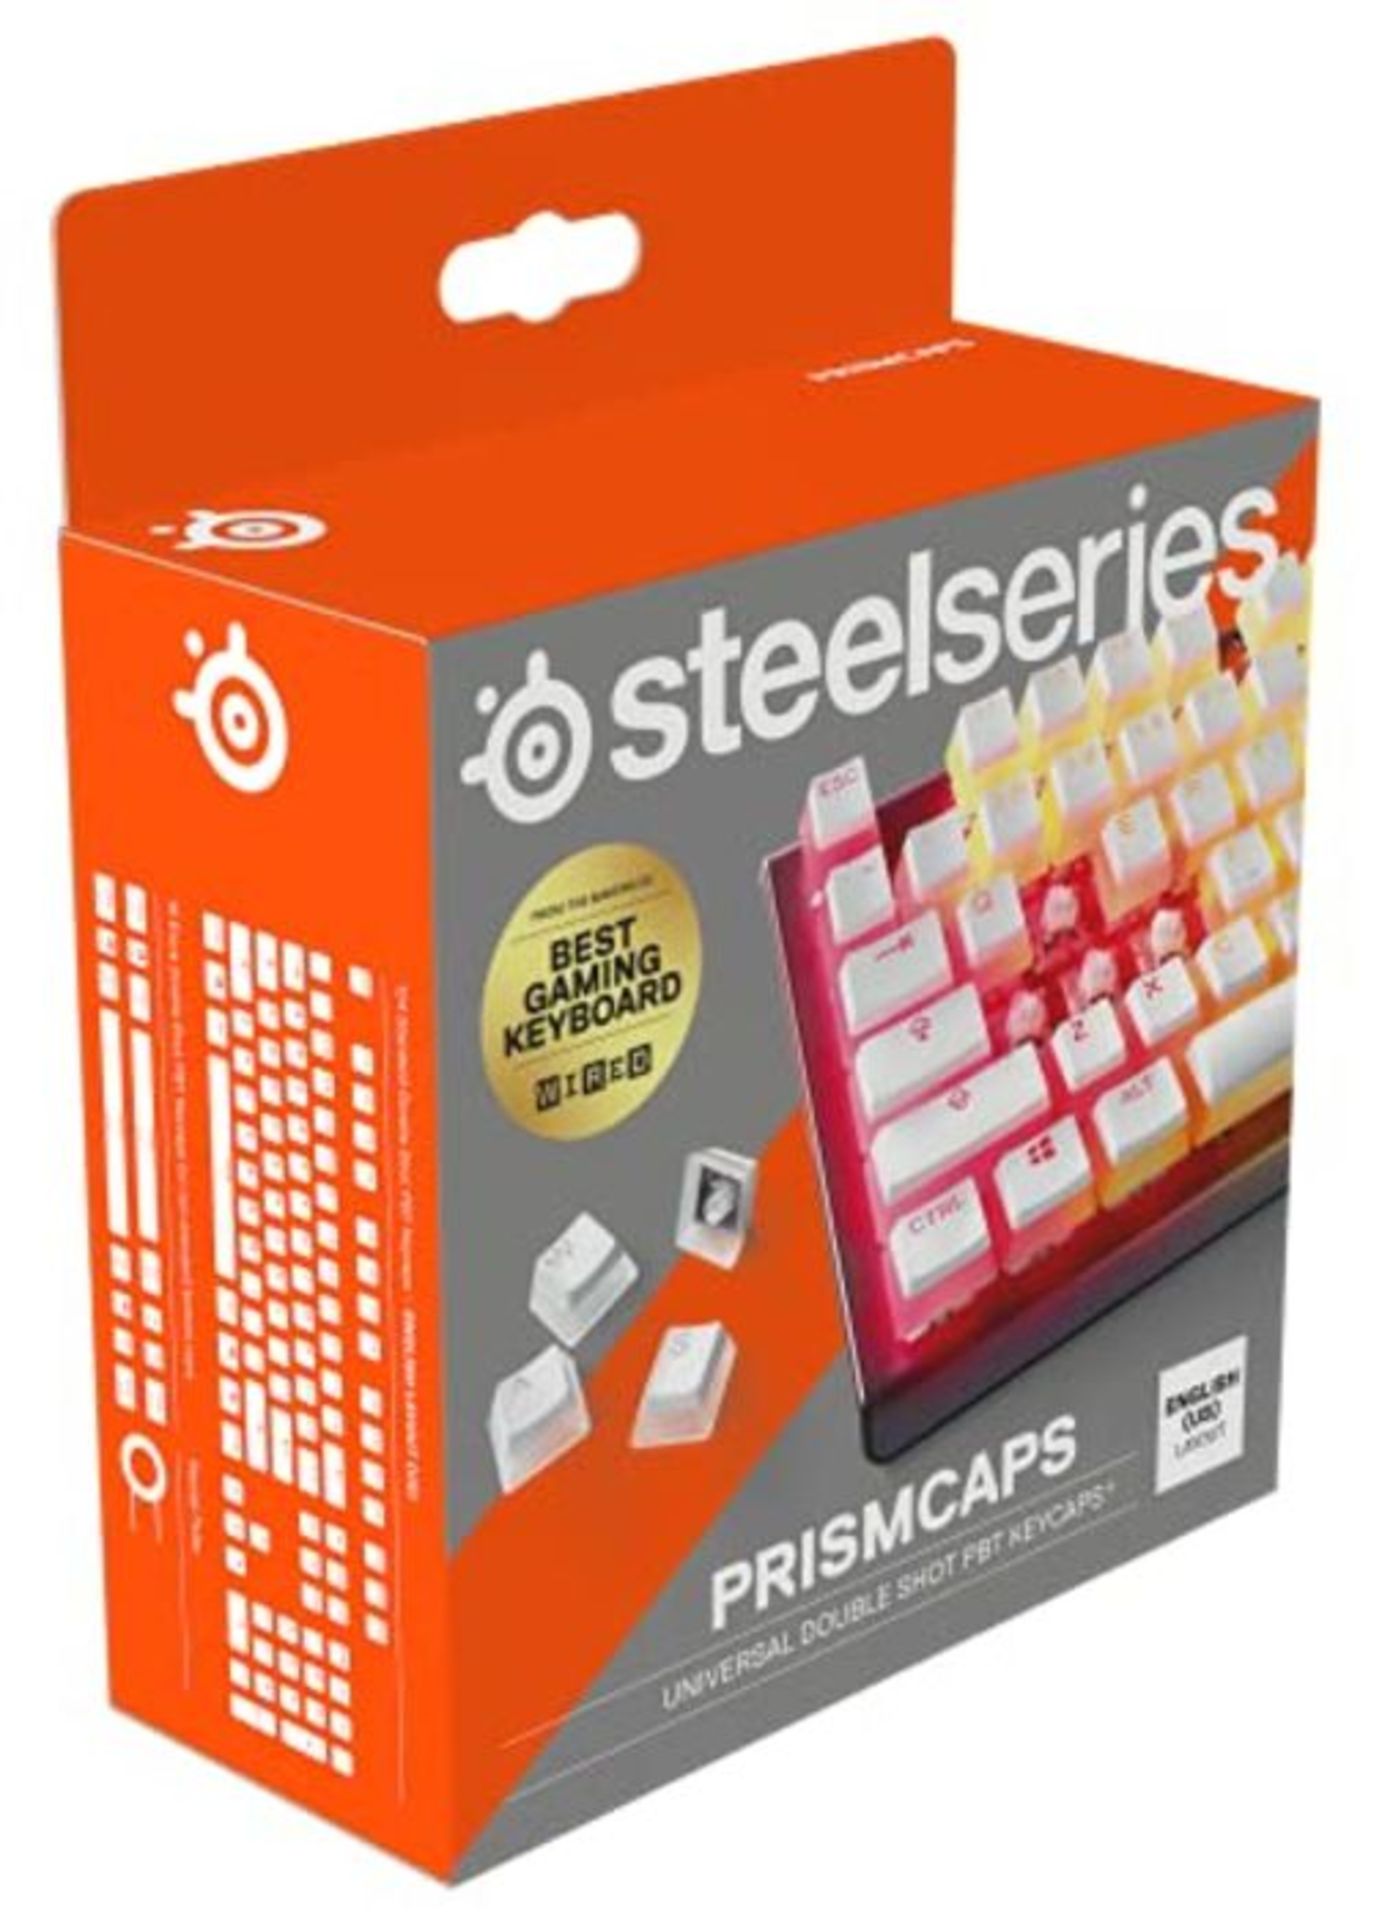 SteelSeries PrismCaps - Double Shot Pudding-style Keycaps - Durable PBT Thermoplastic